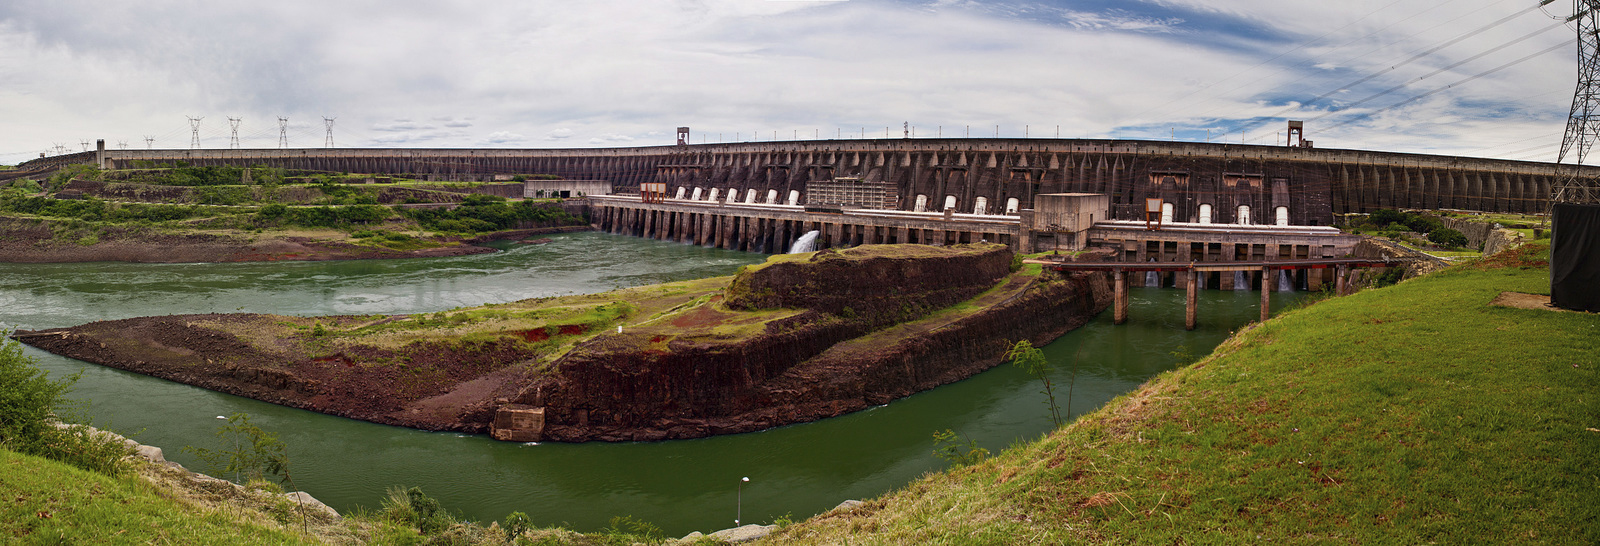 Itaipu Dam, a binational hydroelectric dam on the Paraná River located on the border between Brazil and Paraguay. The dam is the largest operating hydroelectric facility in terms of annual energy generation. Photo © Erika Nortemann/The Nature Conservancy